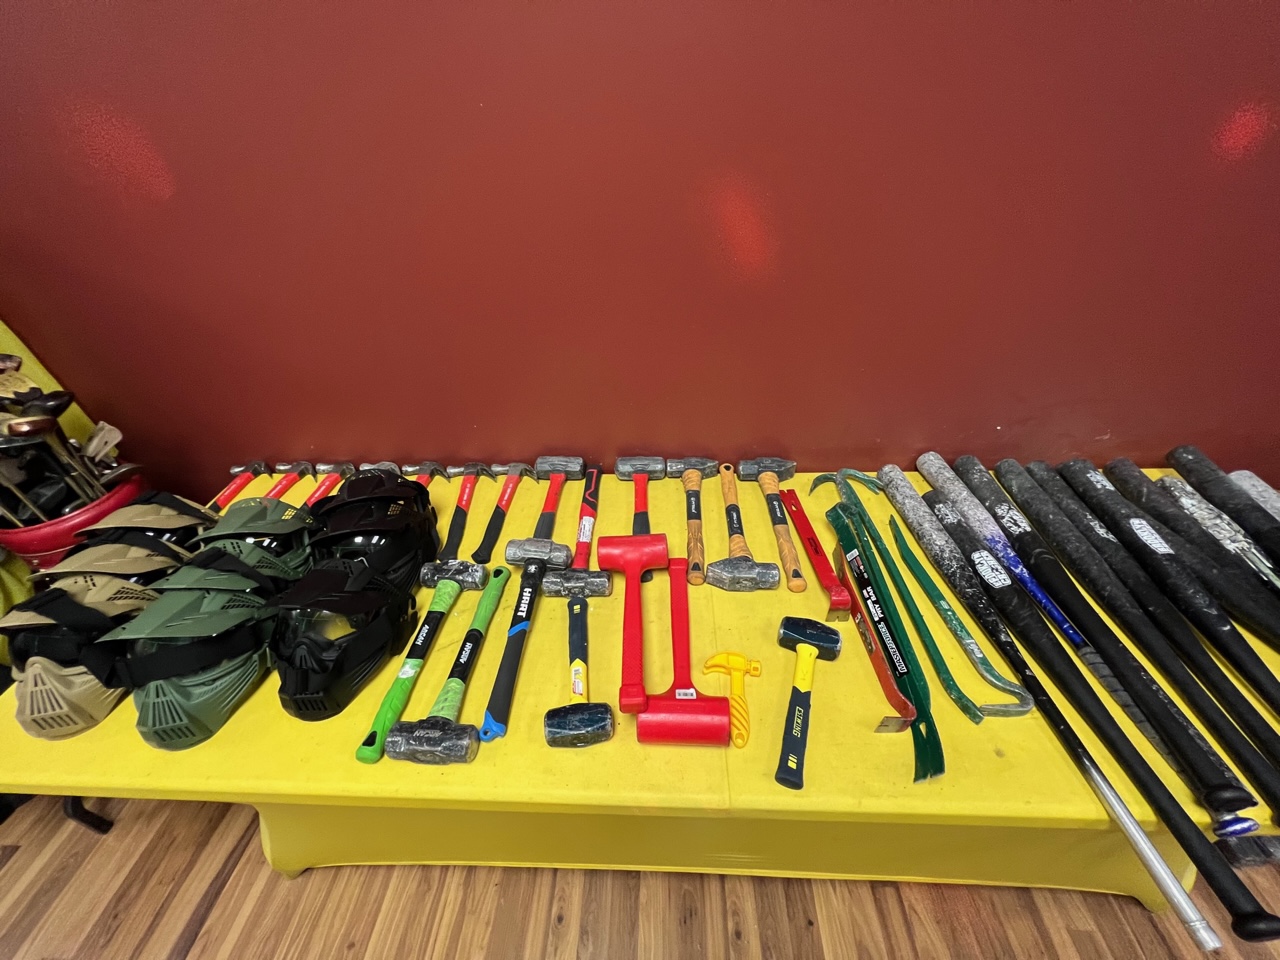 A yellow table with face masks, mallets, hammers, crowbars, and baseball bats at Rage Room Champaign.